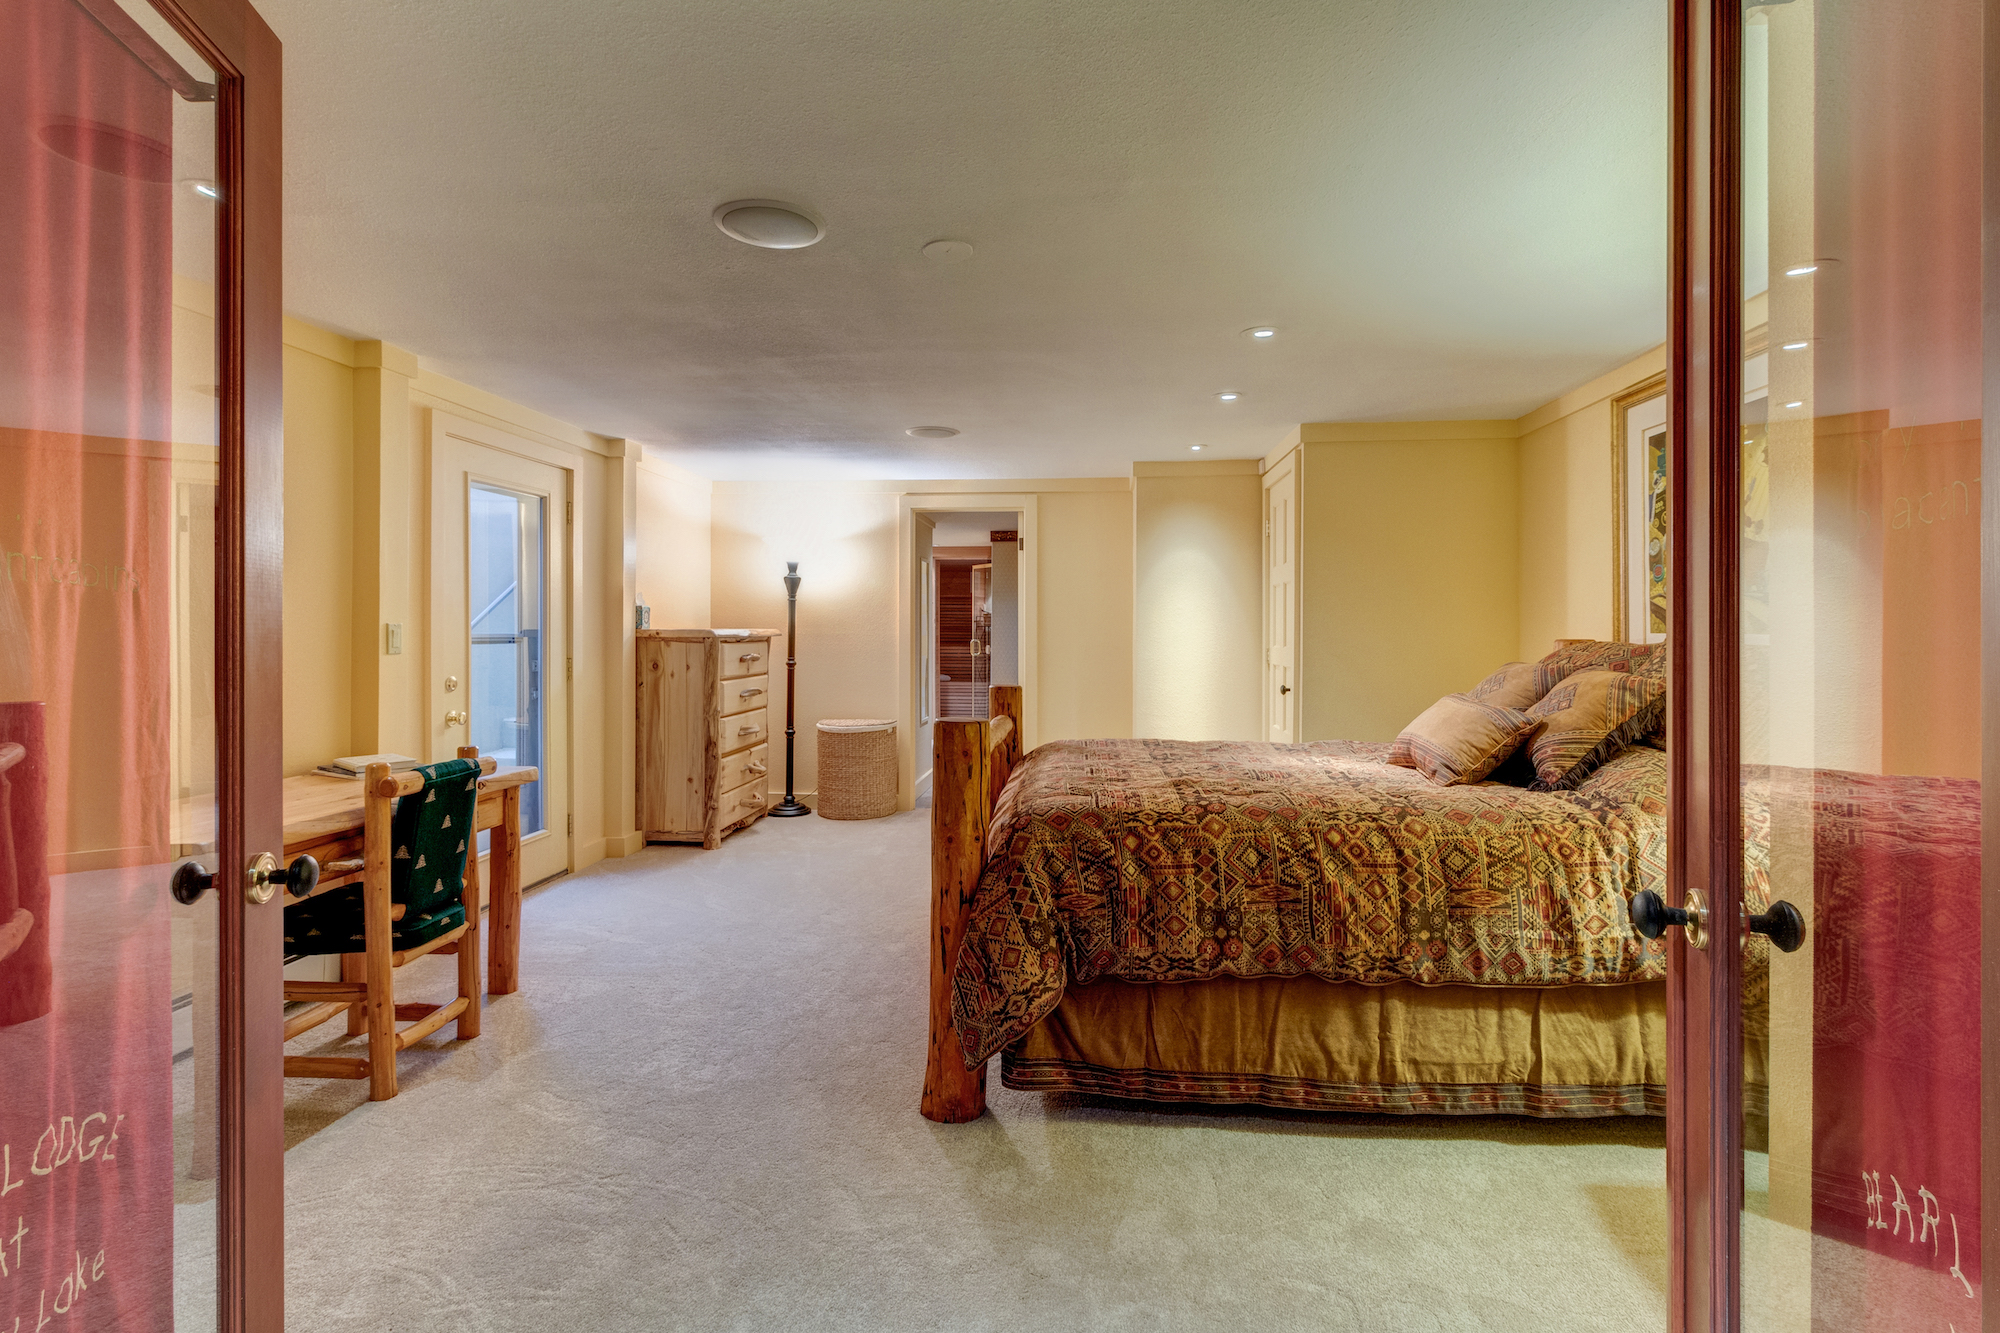 22-Lower level guest suite w separate outside entrance and adjoining bathroom.jpg